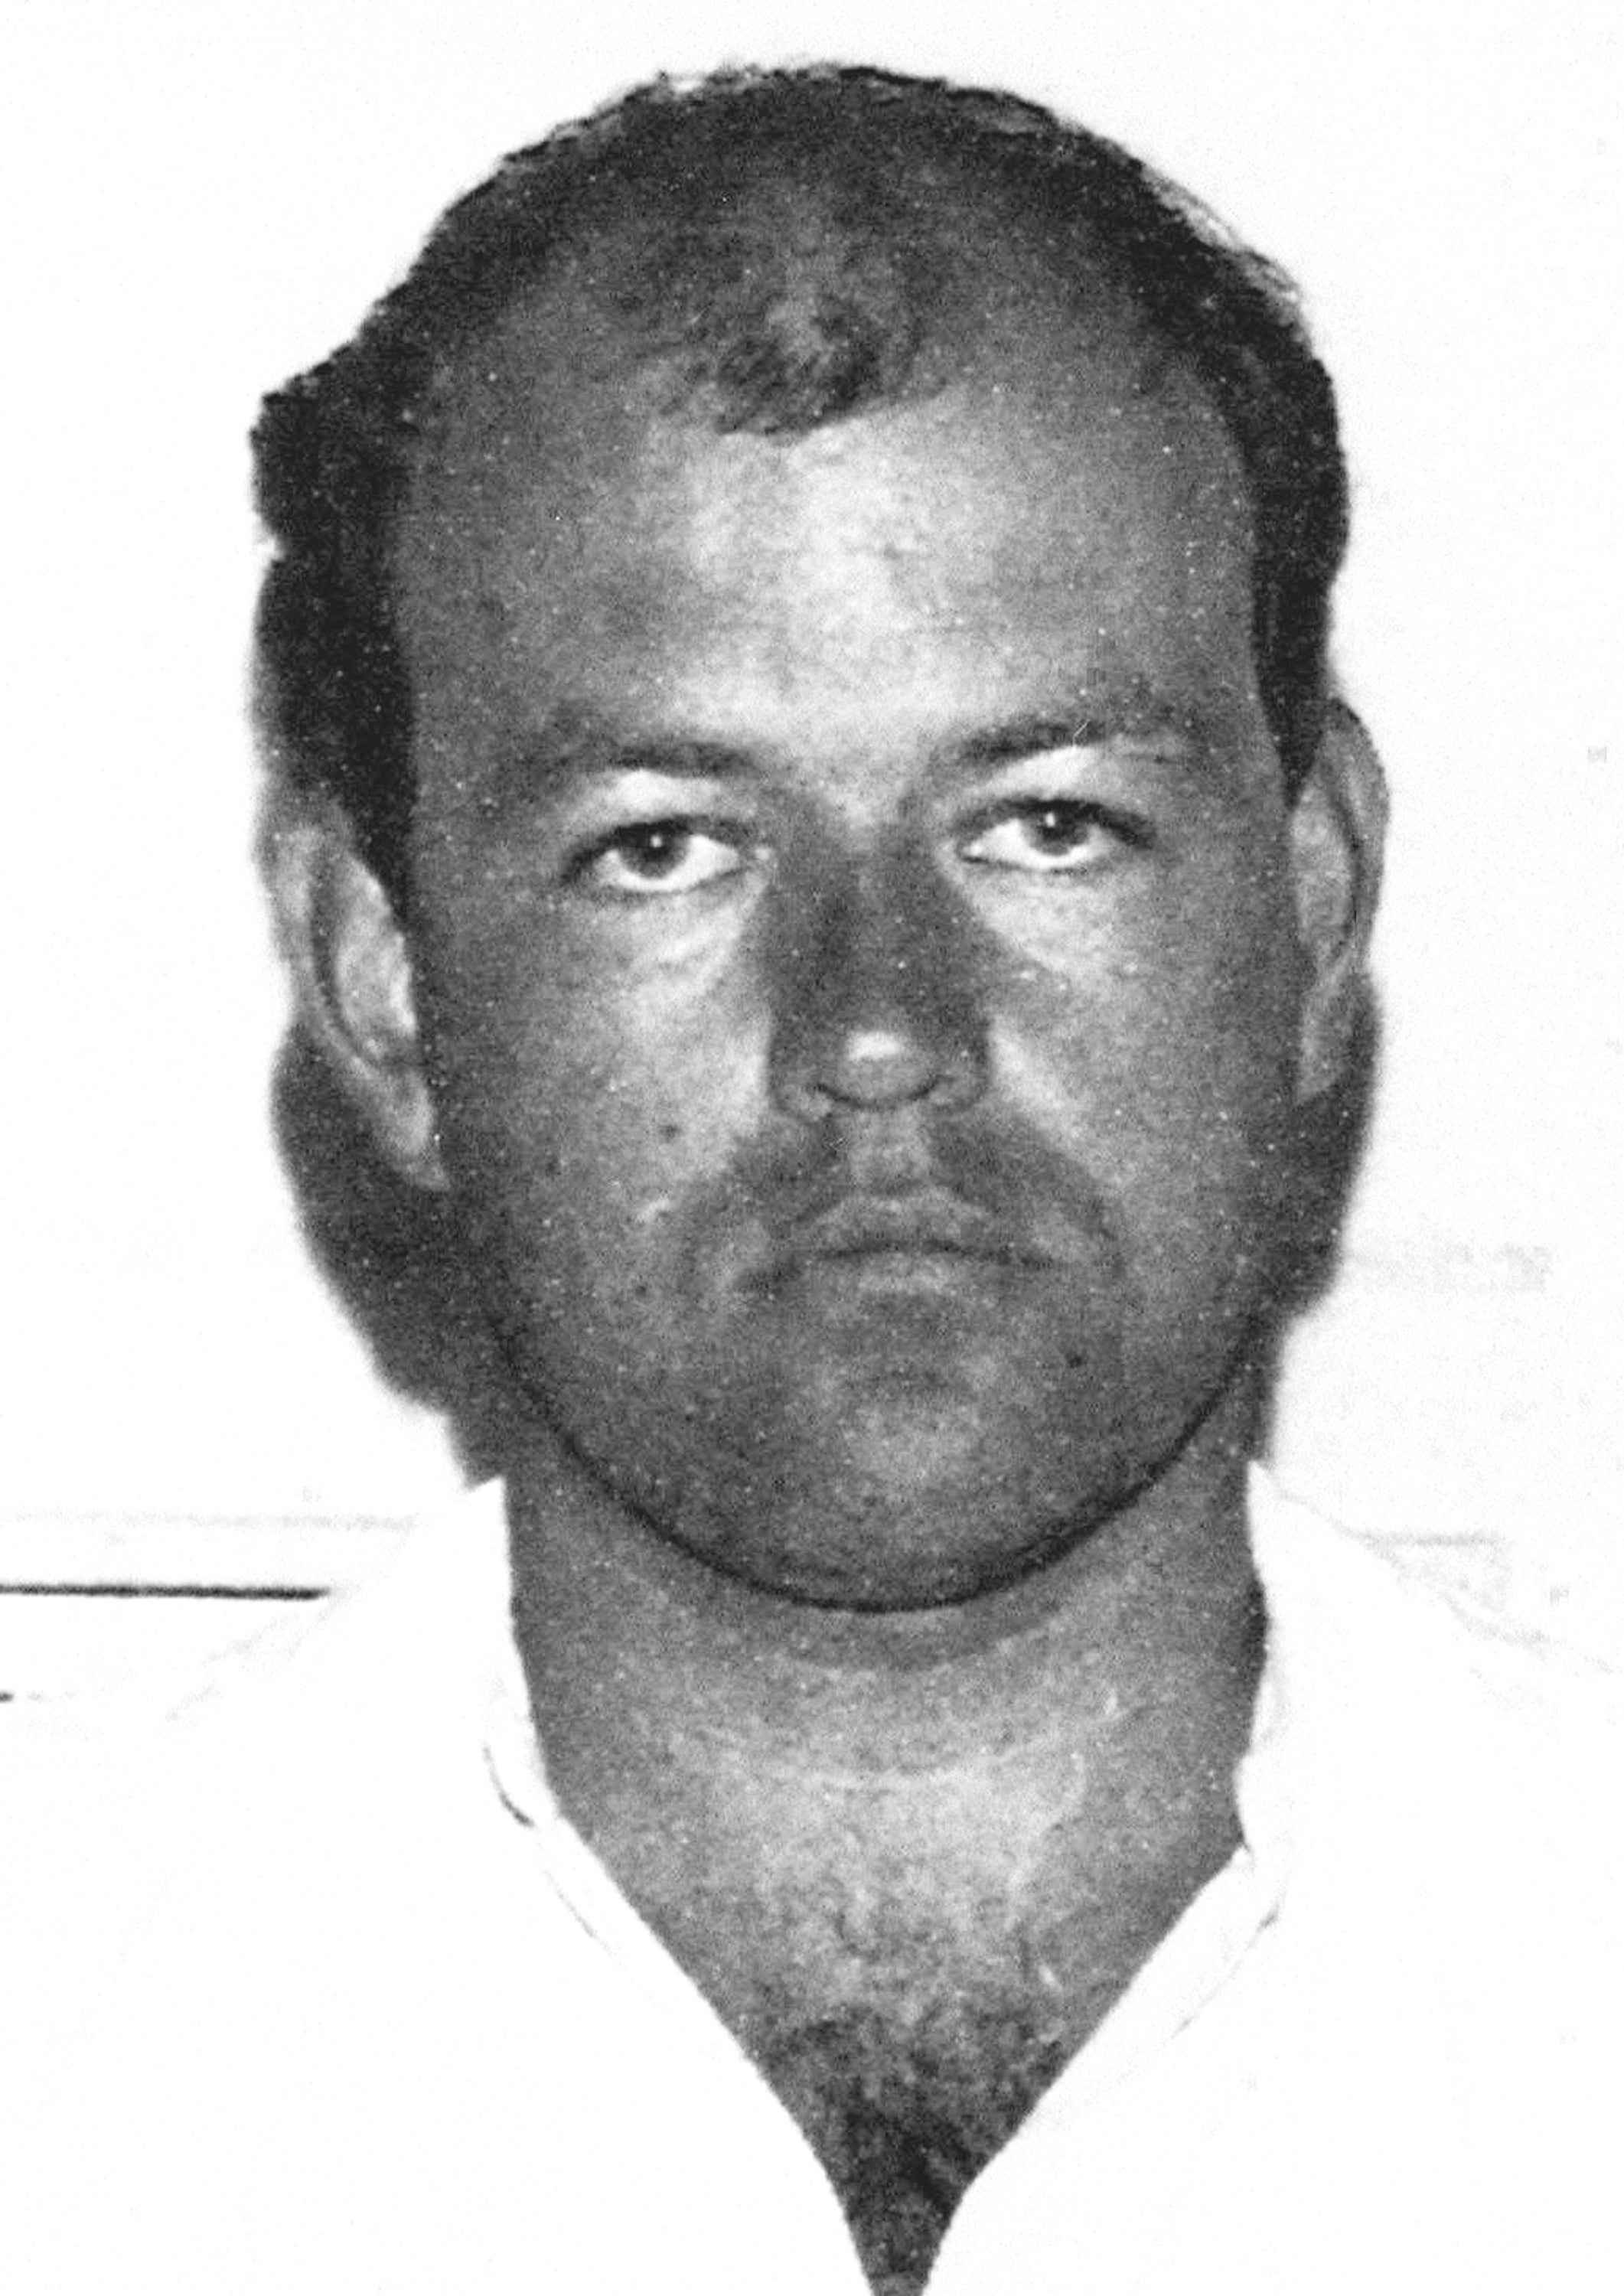 Colin Pitchfork was the first person to be convicted using DNA evidence